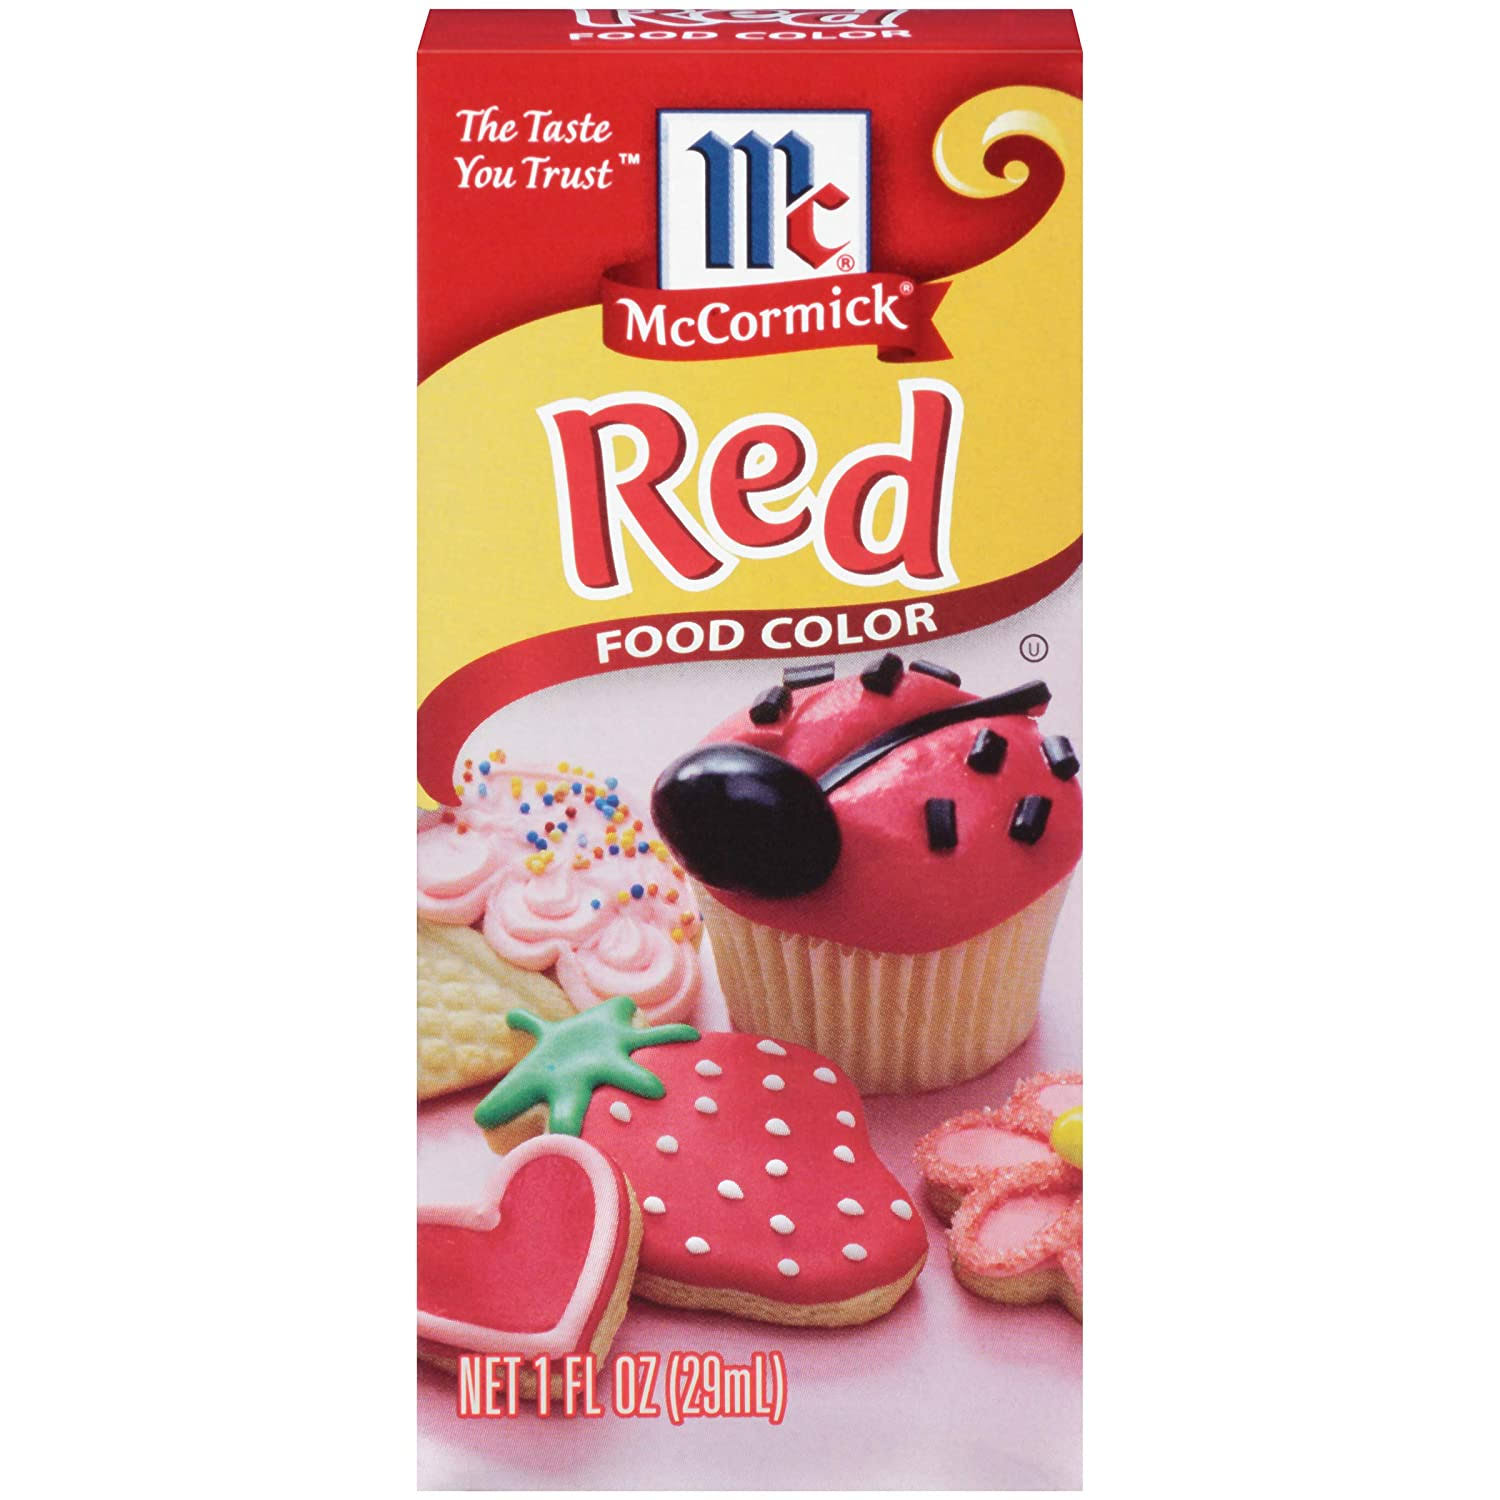 Mccormick Food Color - Red, 29ml